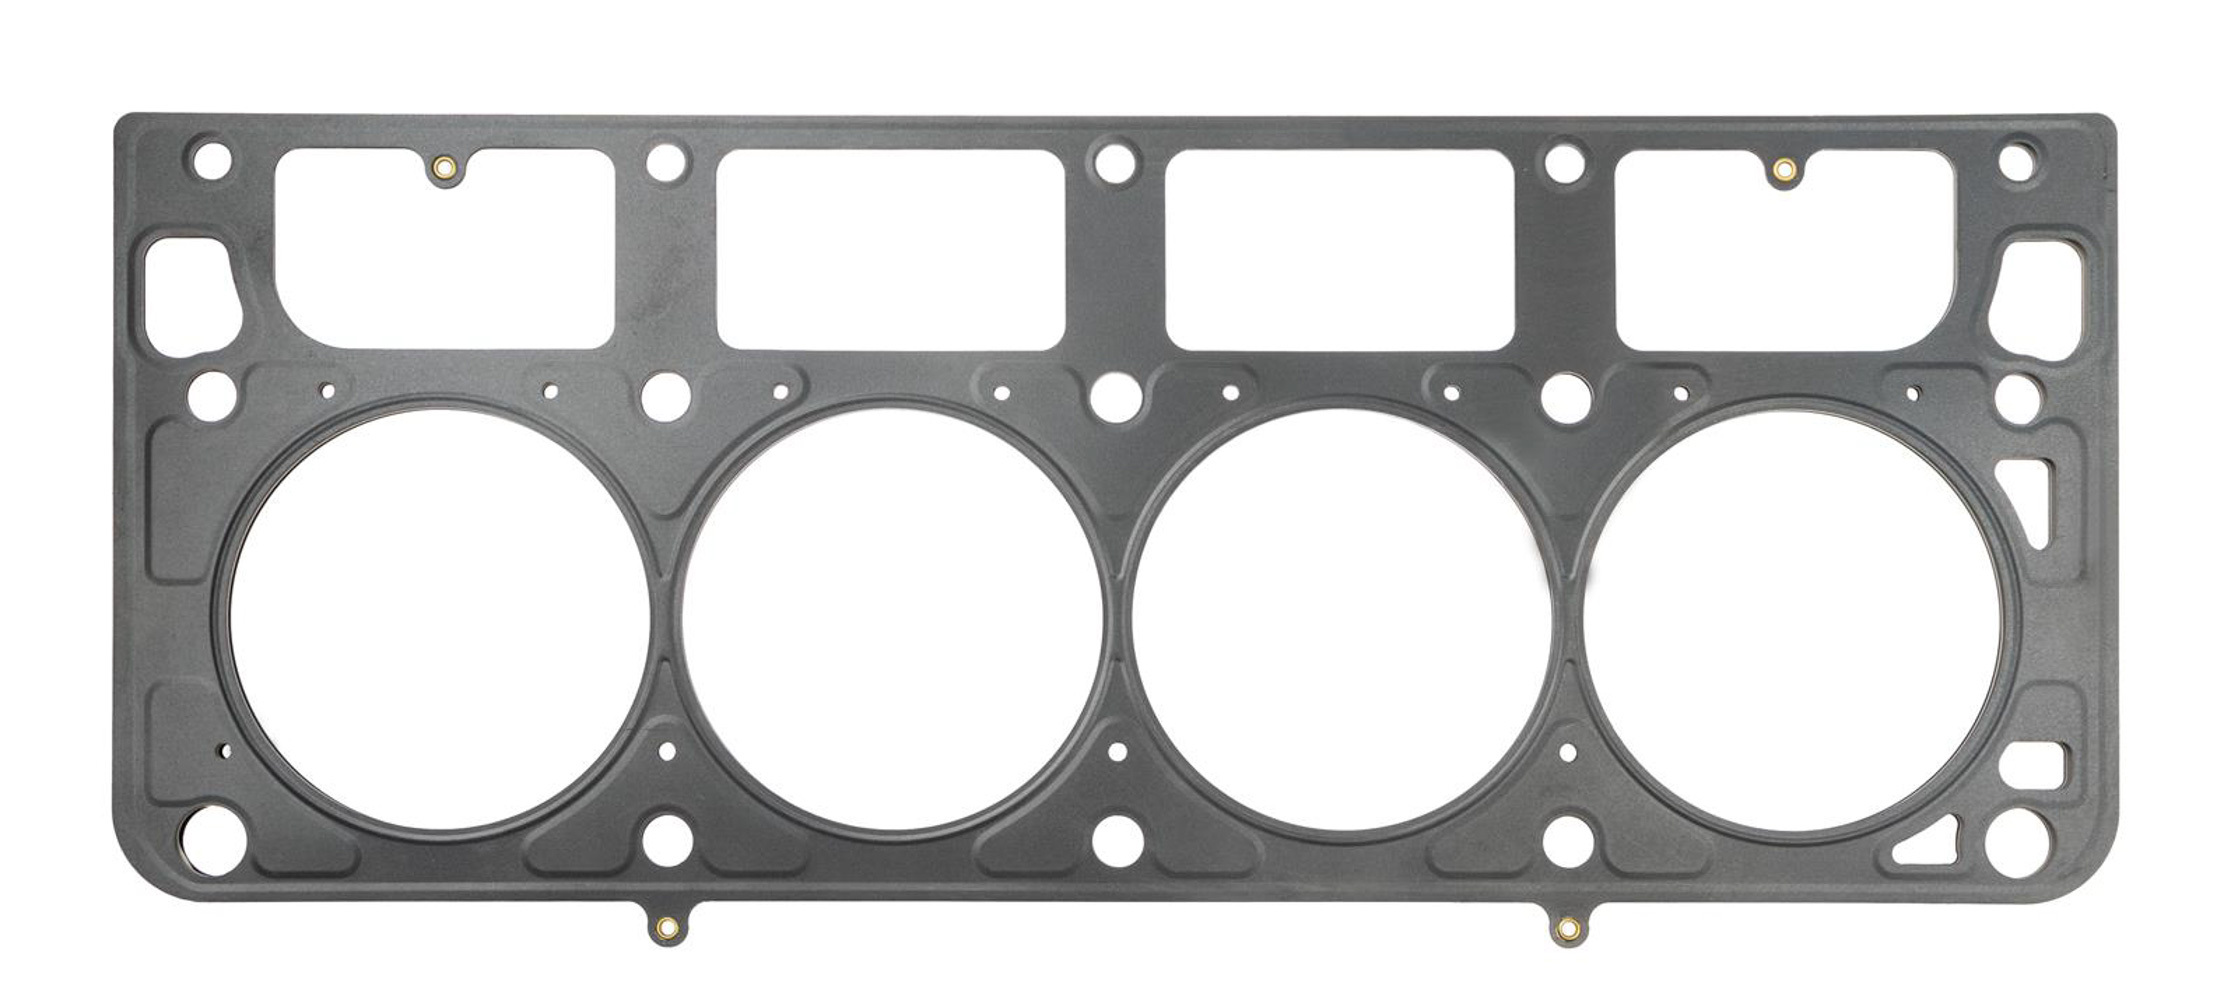 SCE Gaskets M209439 - Cylinder Head Gasket, MLS Spartan, 3.945 in Bore, 0.039 in Compression Thickness, Multi-Layer Steel, GM LS-Series, Each